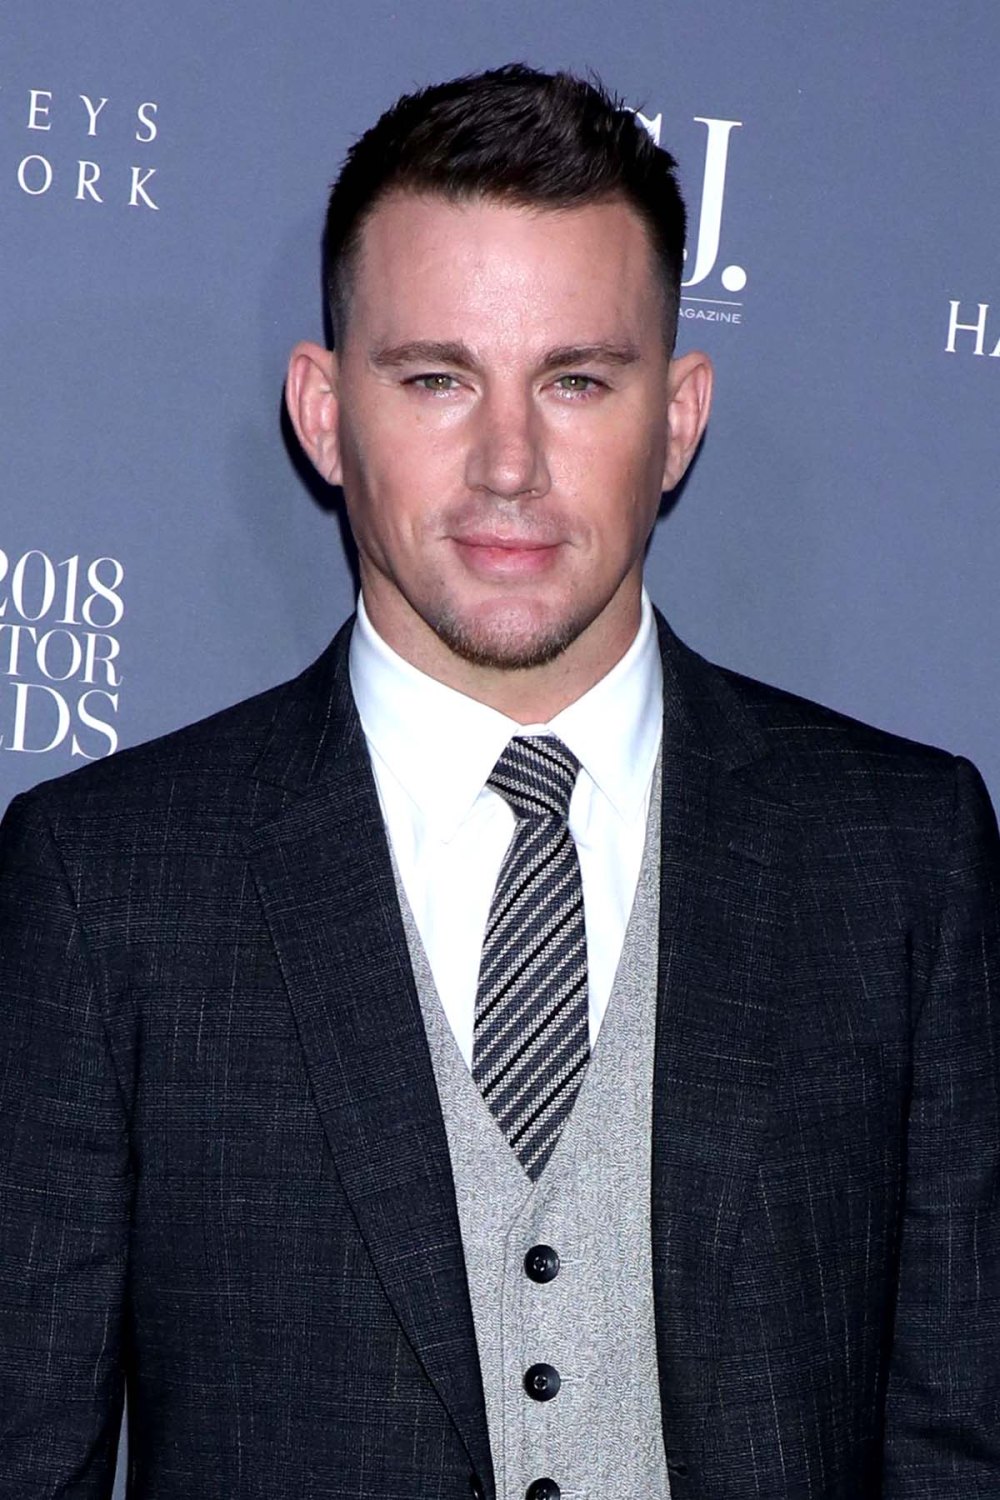 Channing Tatum Shares New Photo 8 Year Old Daughter Everlys Face Missing Her